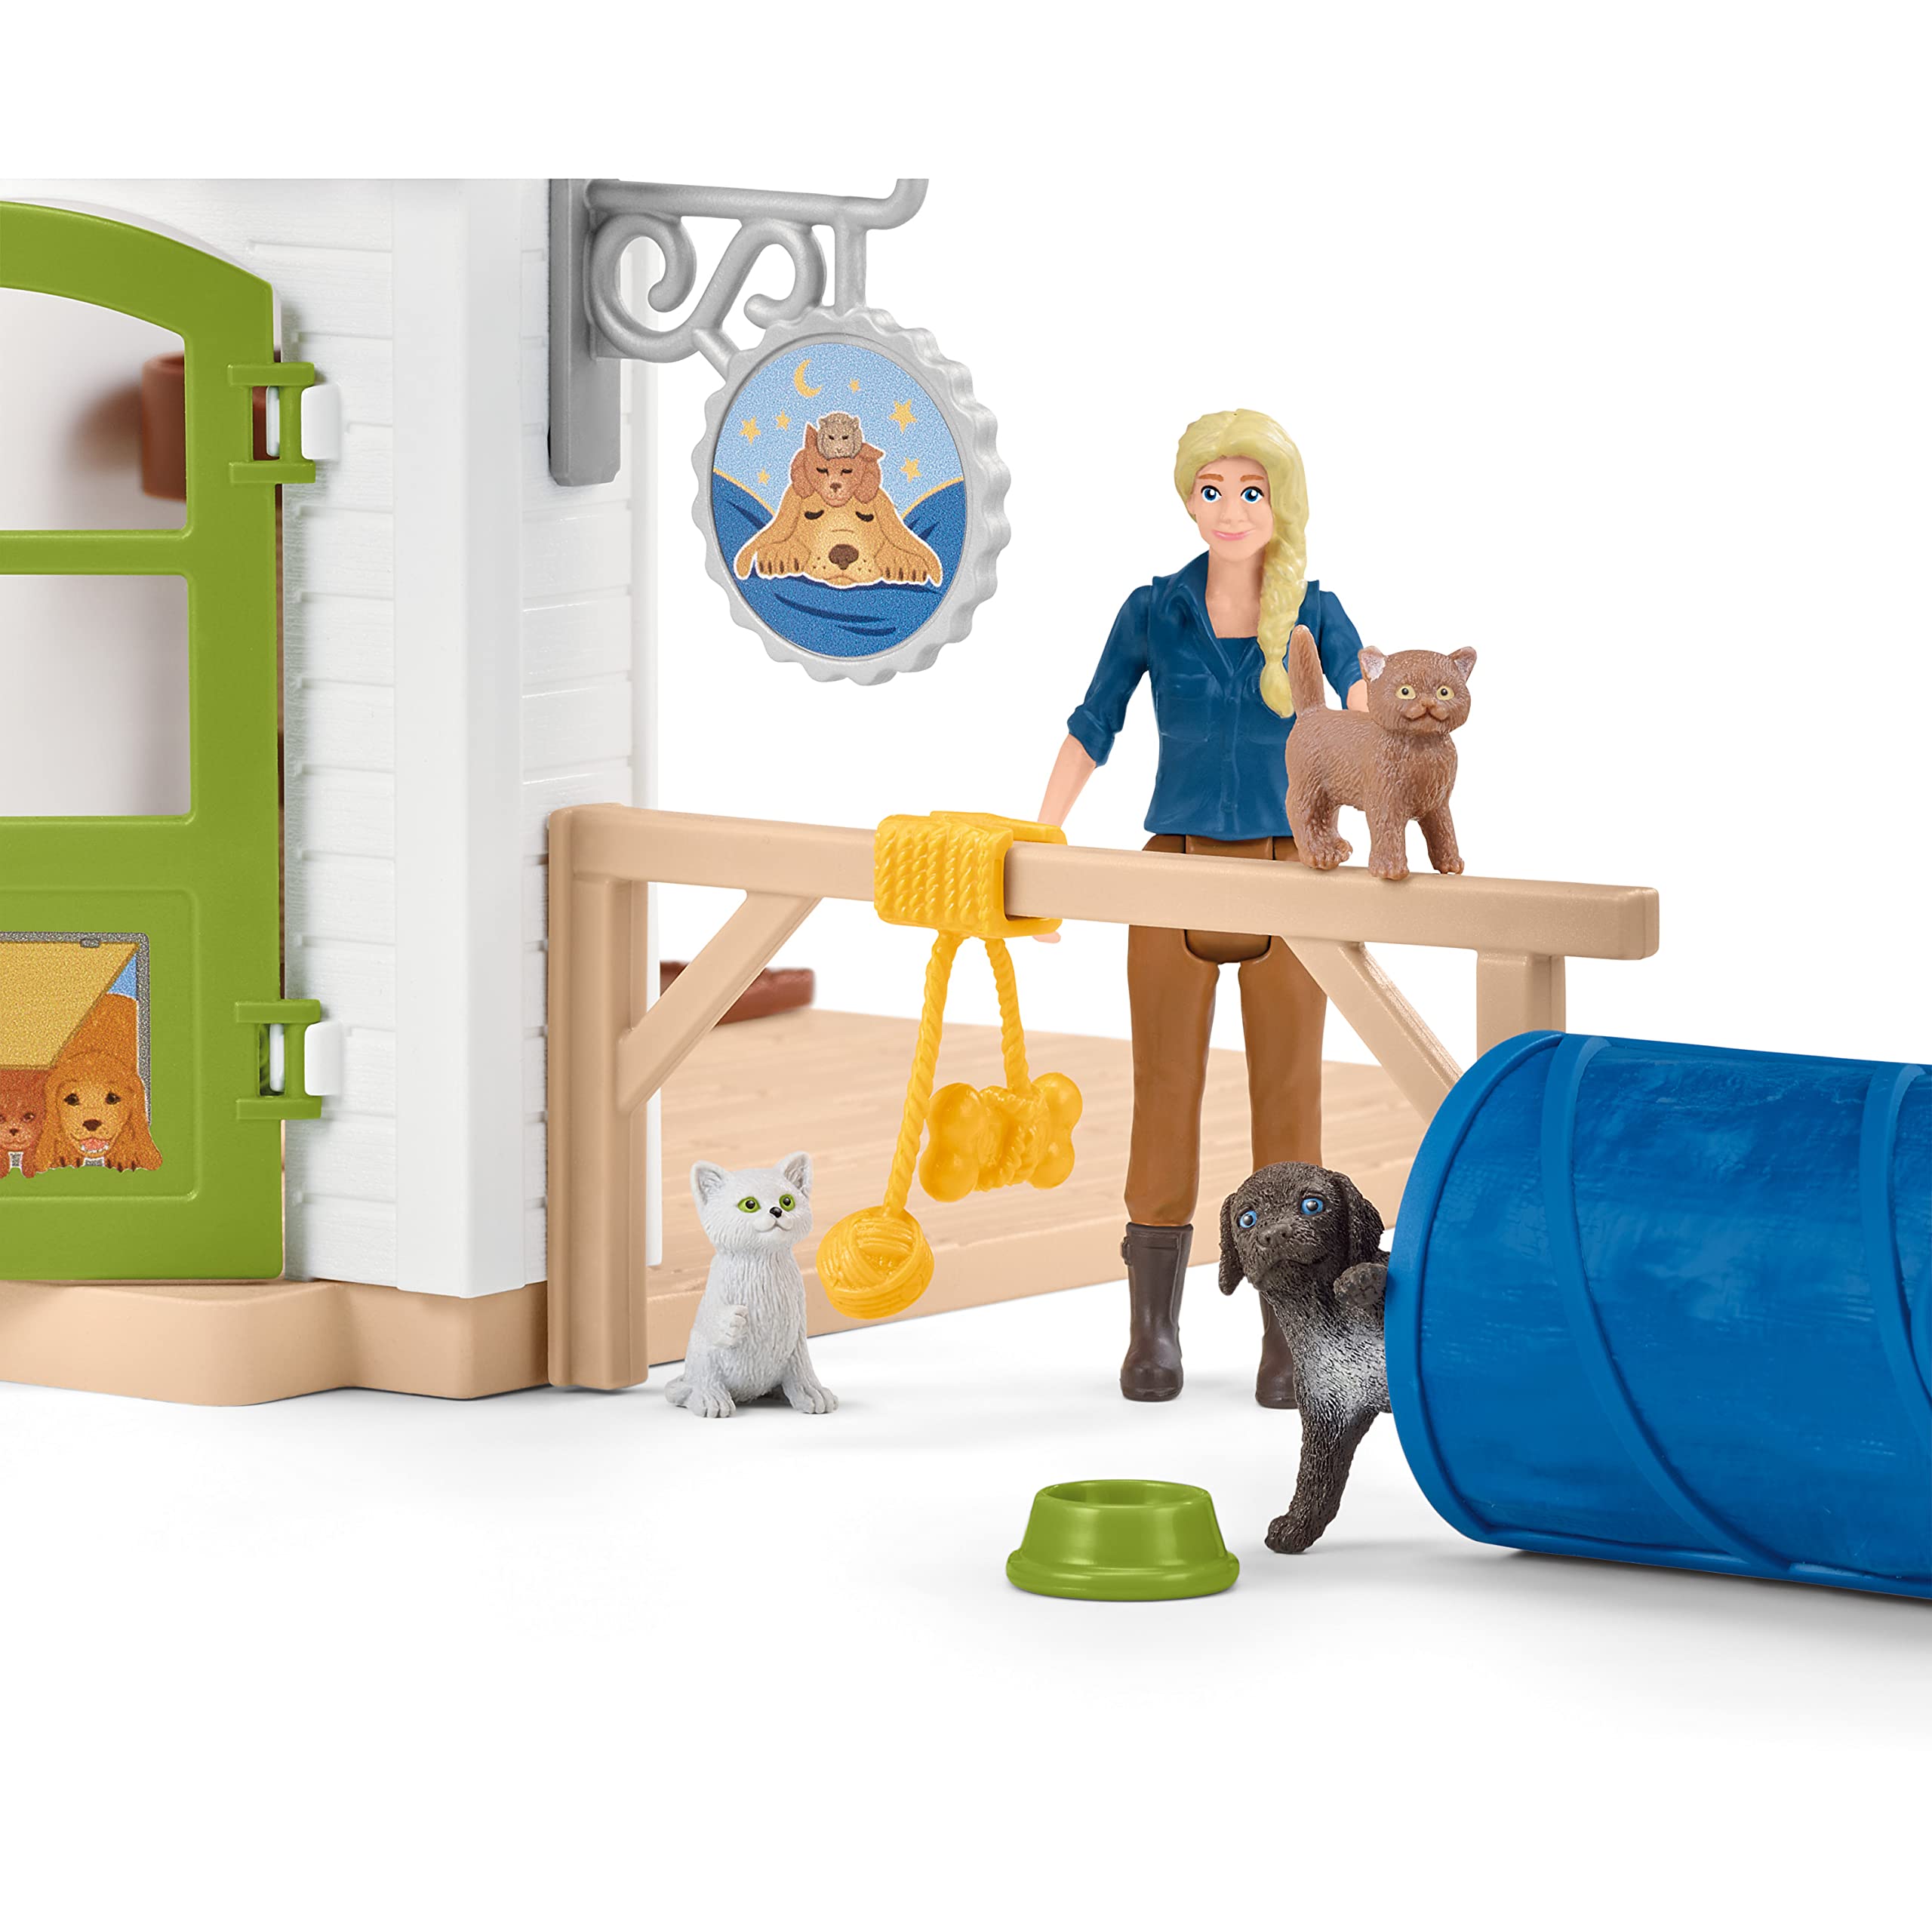 Schleich Farm World, Animal Toys for Kids, Pet Hotel Playset with Baby Animal Figurines, Dog Cat, and Bunny Toys